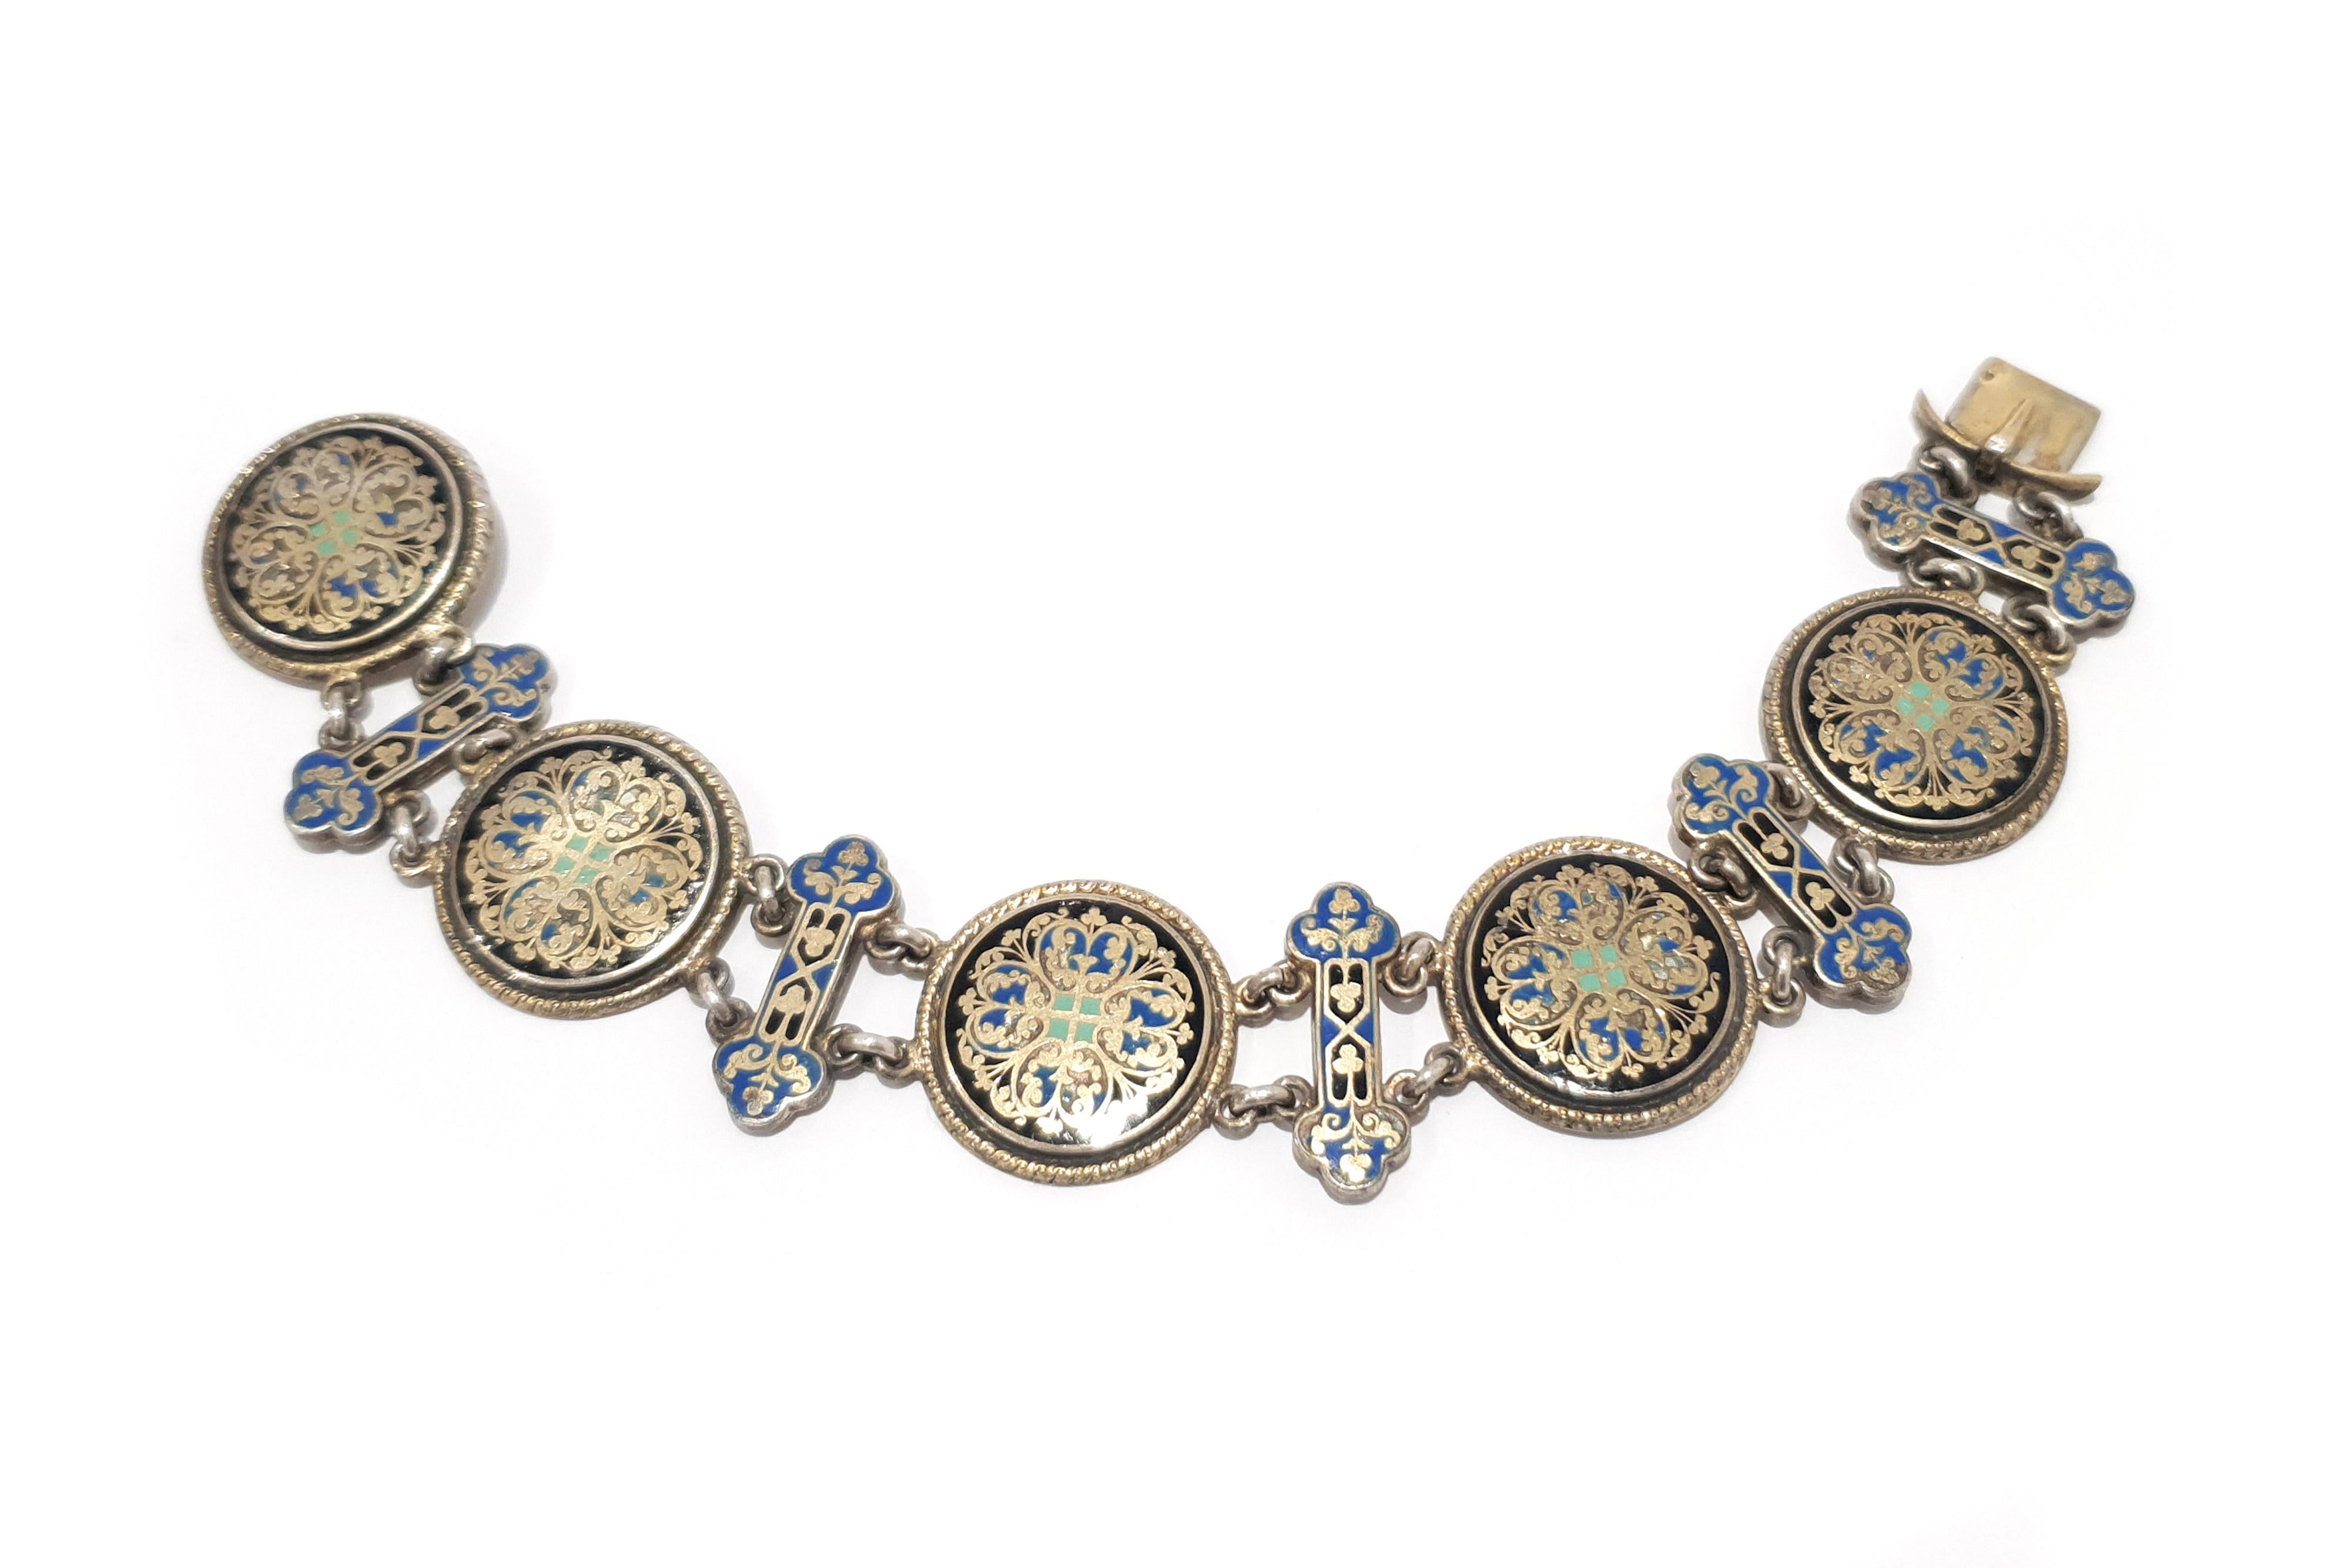 Enamel Victorian silver bracelet 800. It is composed of five circular elements alternating sticks with poly-lobed tips and connected by rings. The bracelet is entirely decorated with blue, green and black cloisonné enamel on gilted silver. The clasp